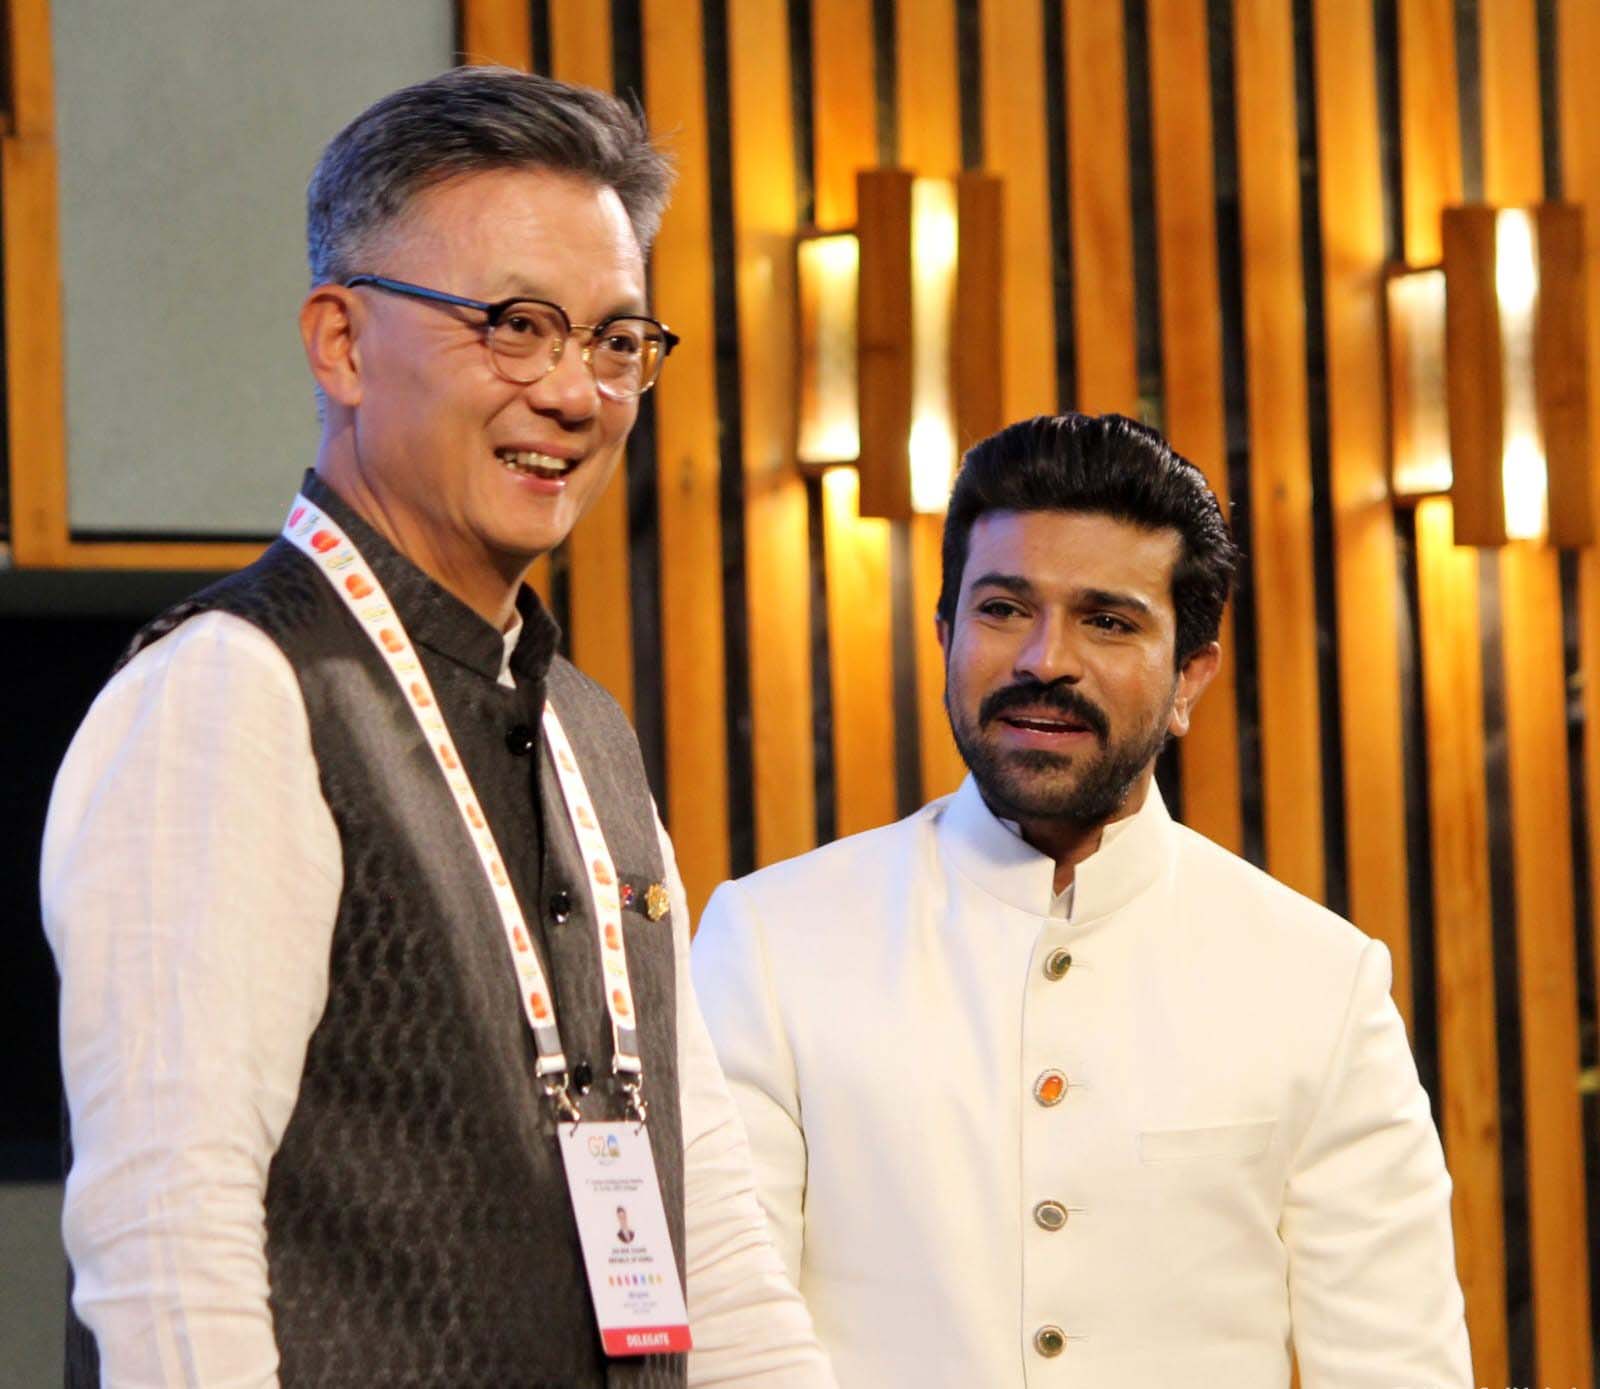 Ram Charan Stuns in Ethnic Attire at G20 Summit in Srinagar; Check out the Pictures